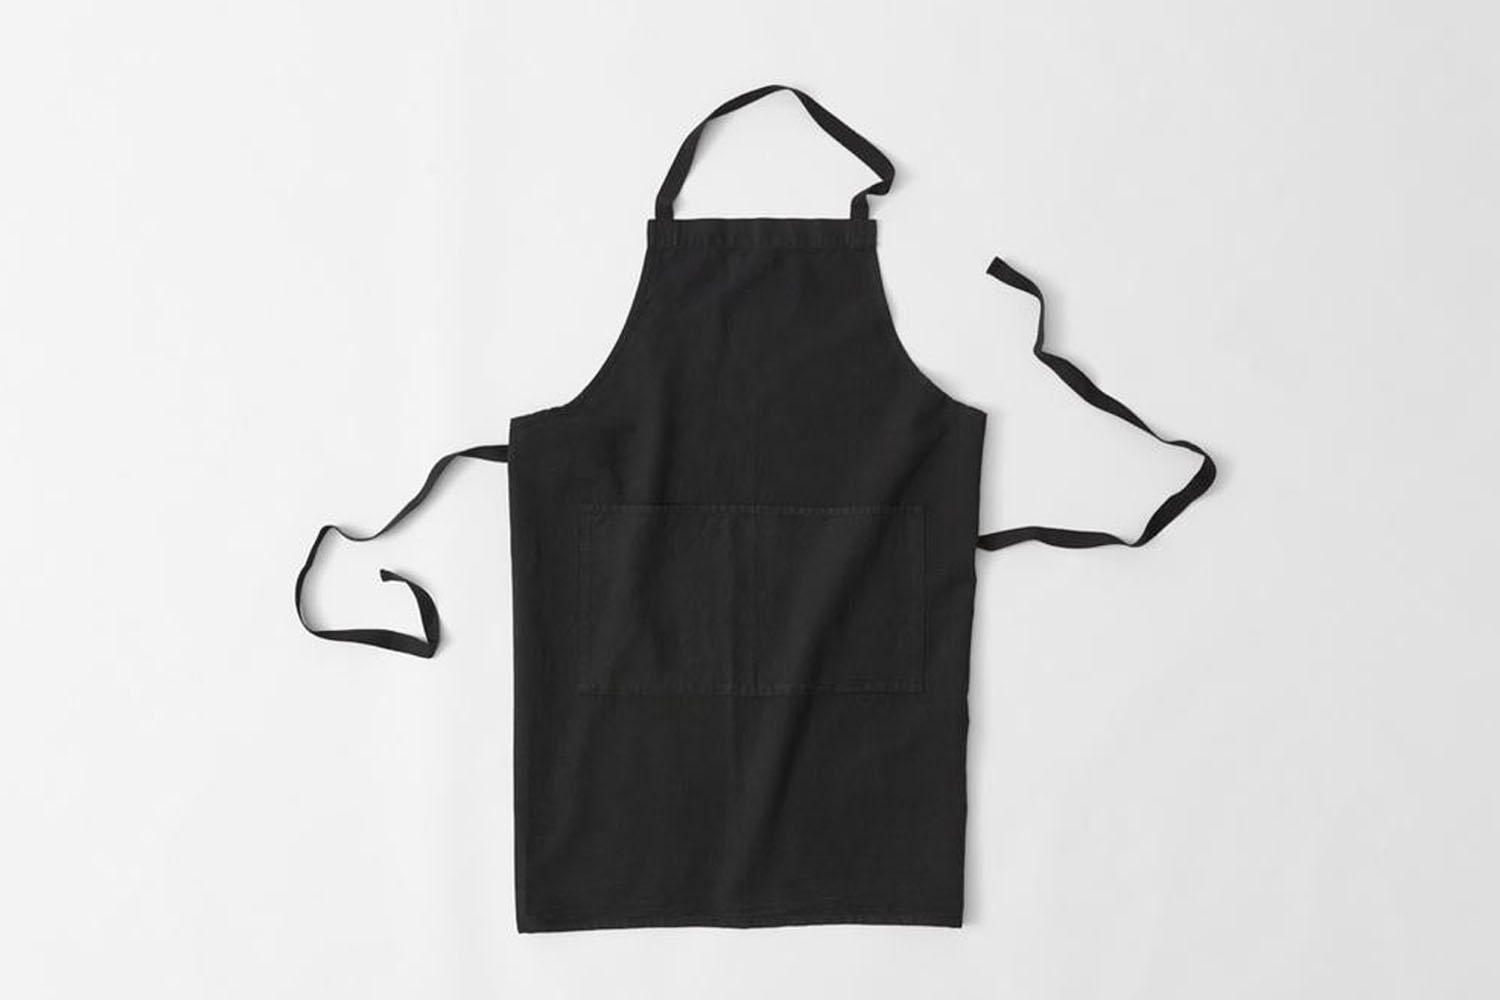 the noir metiers bavette apron by charvet is \$\1\15 at march. 16